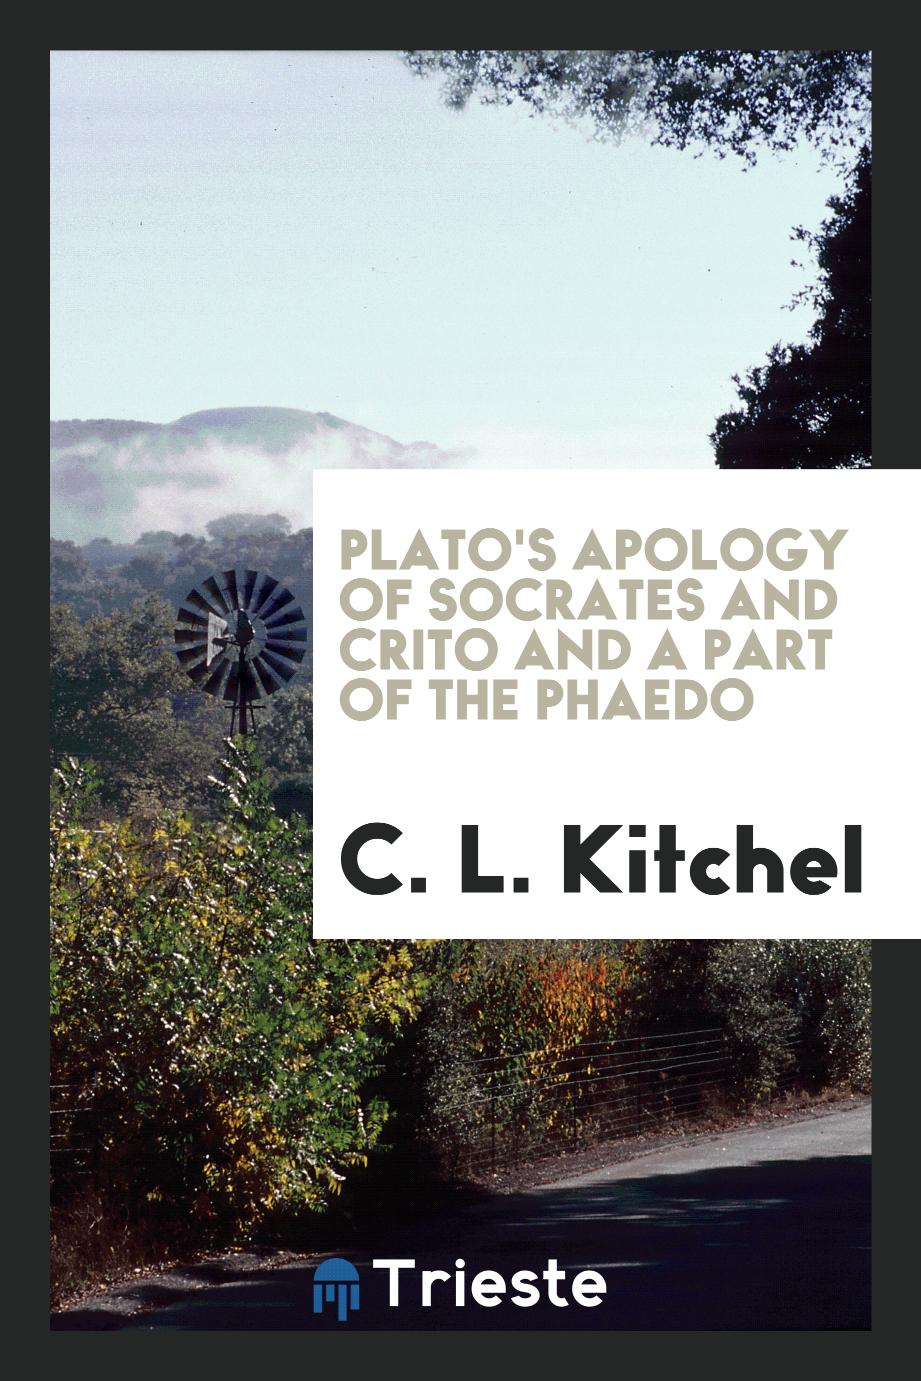 Plato's Apology of Socrates and Crito and a part of the Phaedo